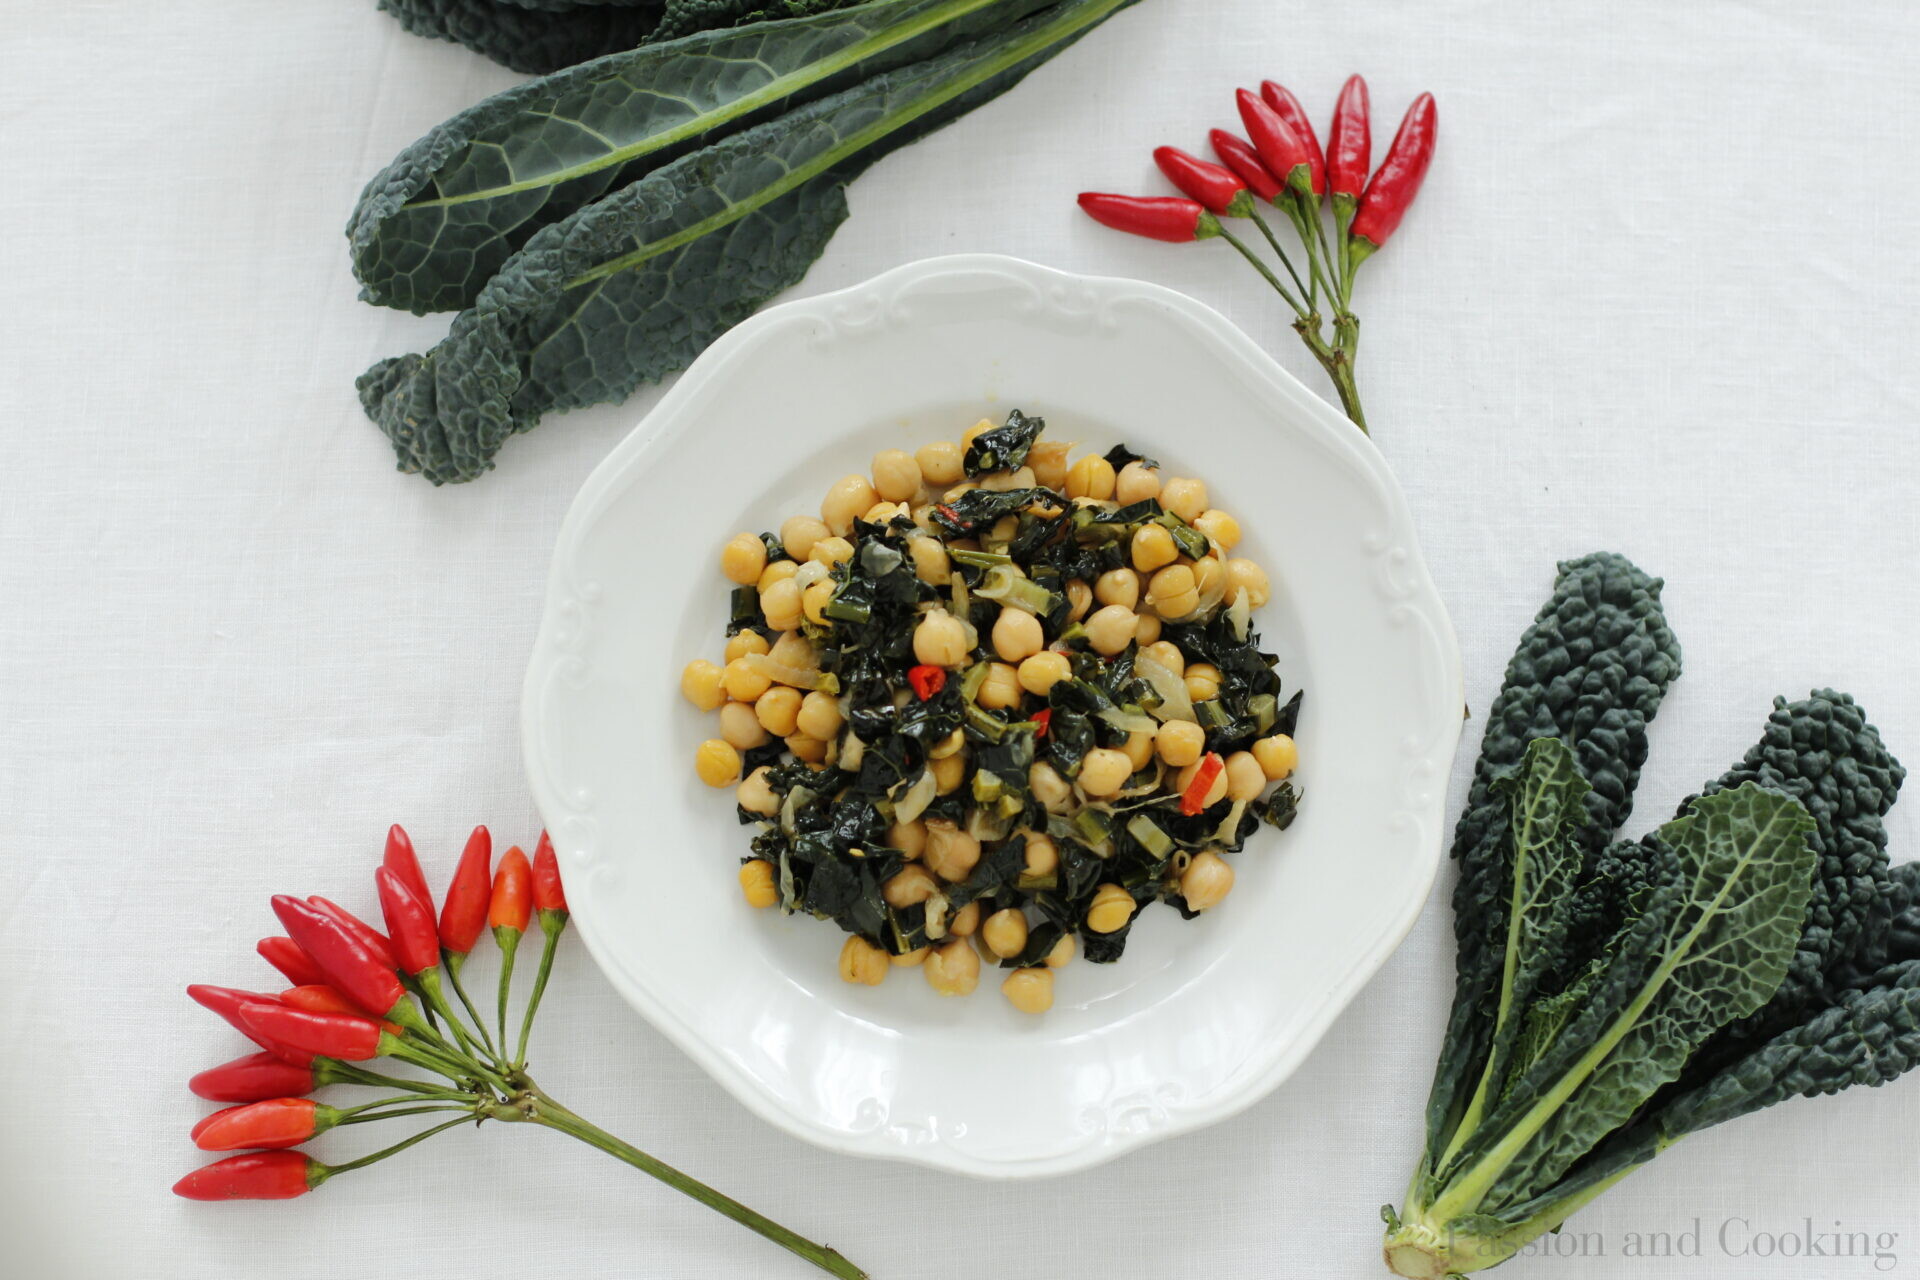 Chickpeas and kale